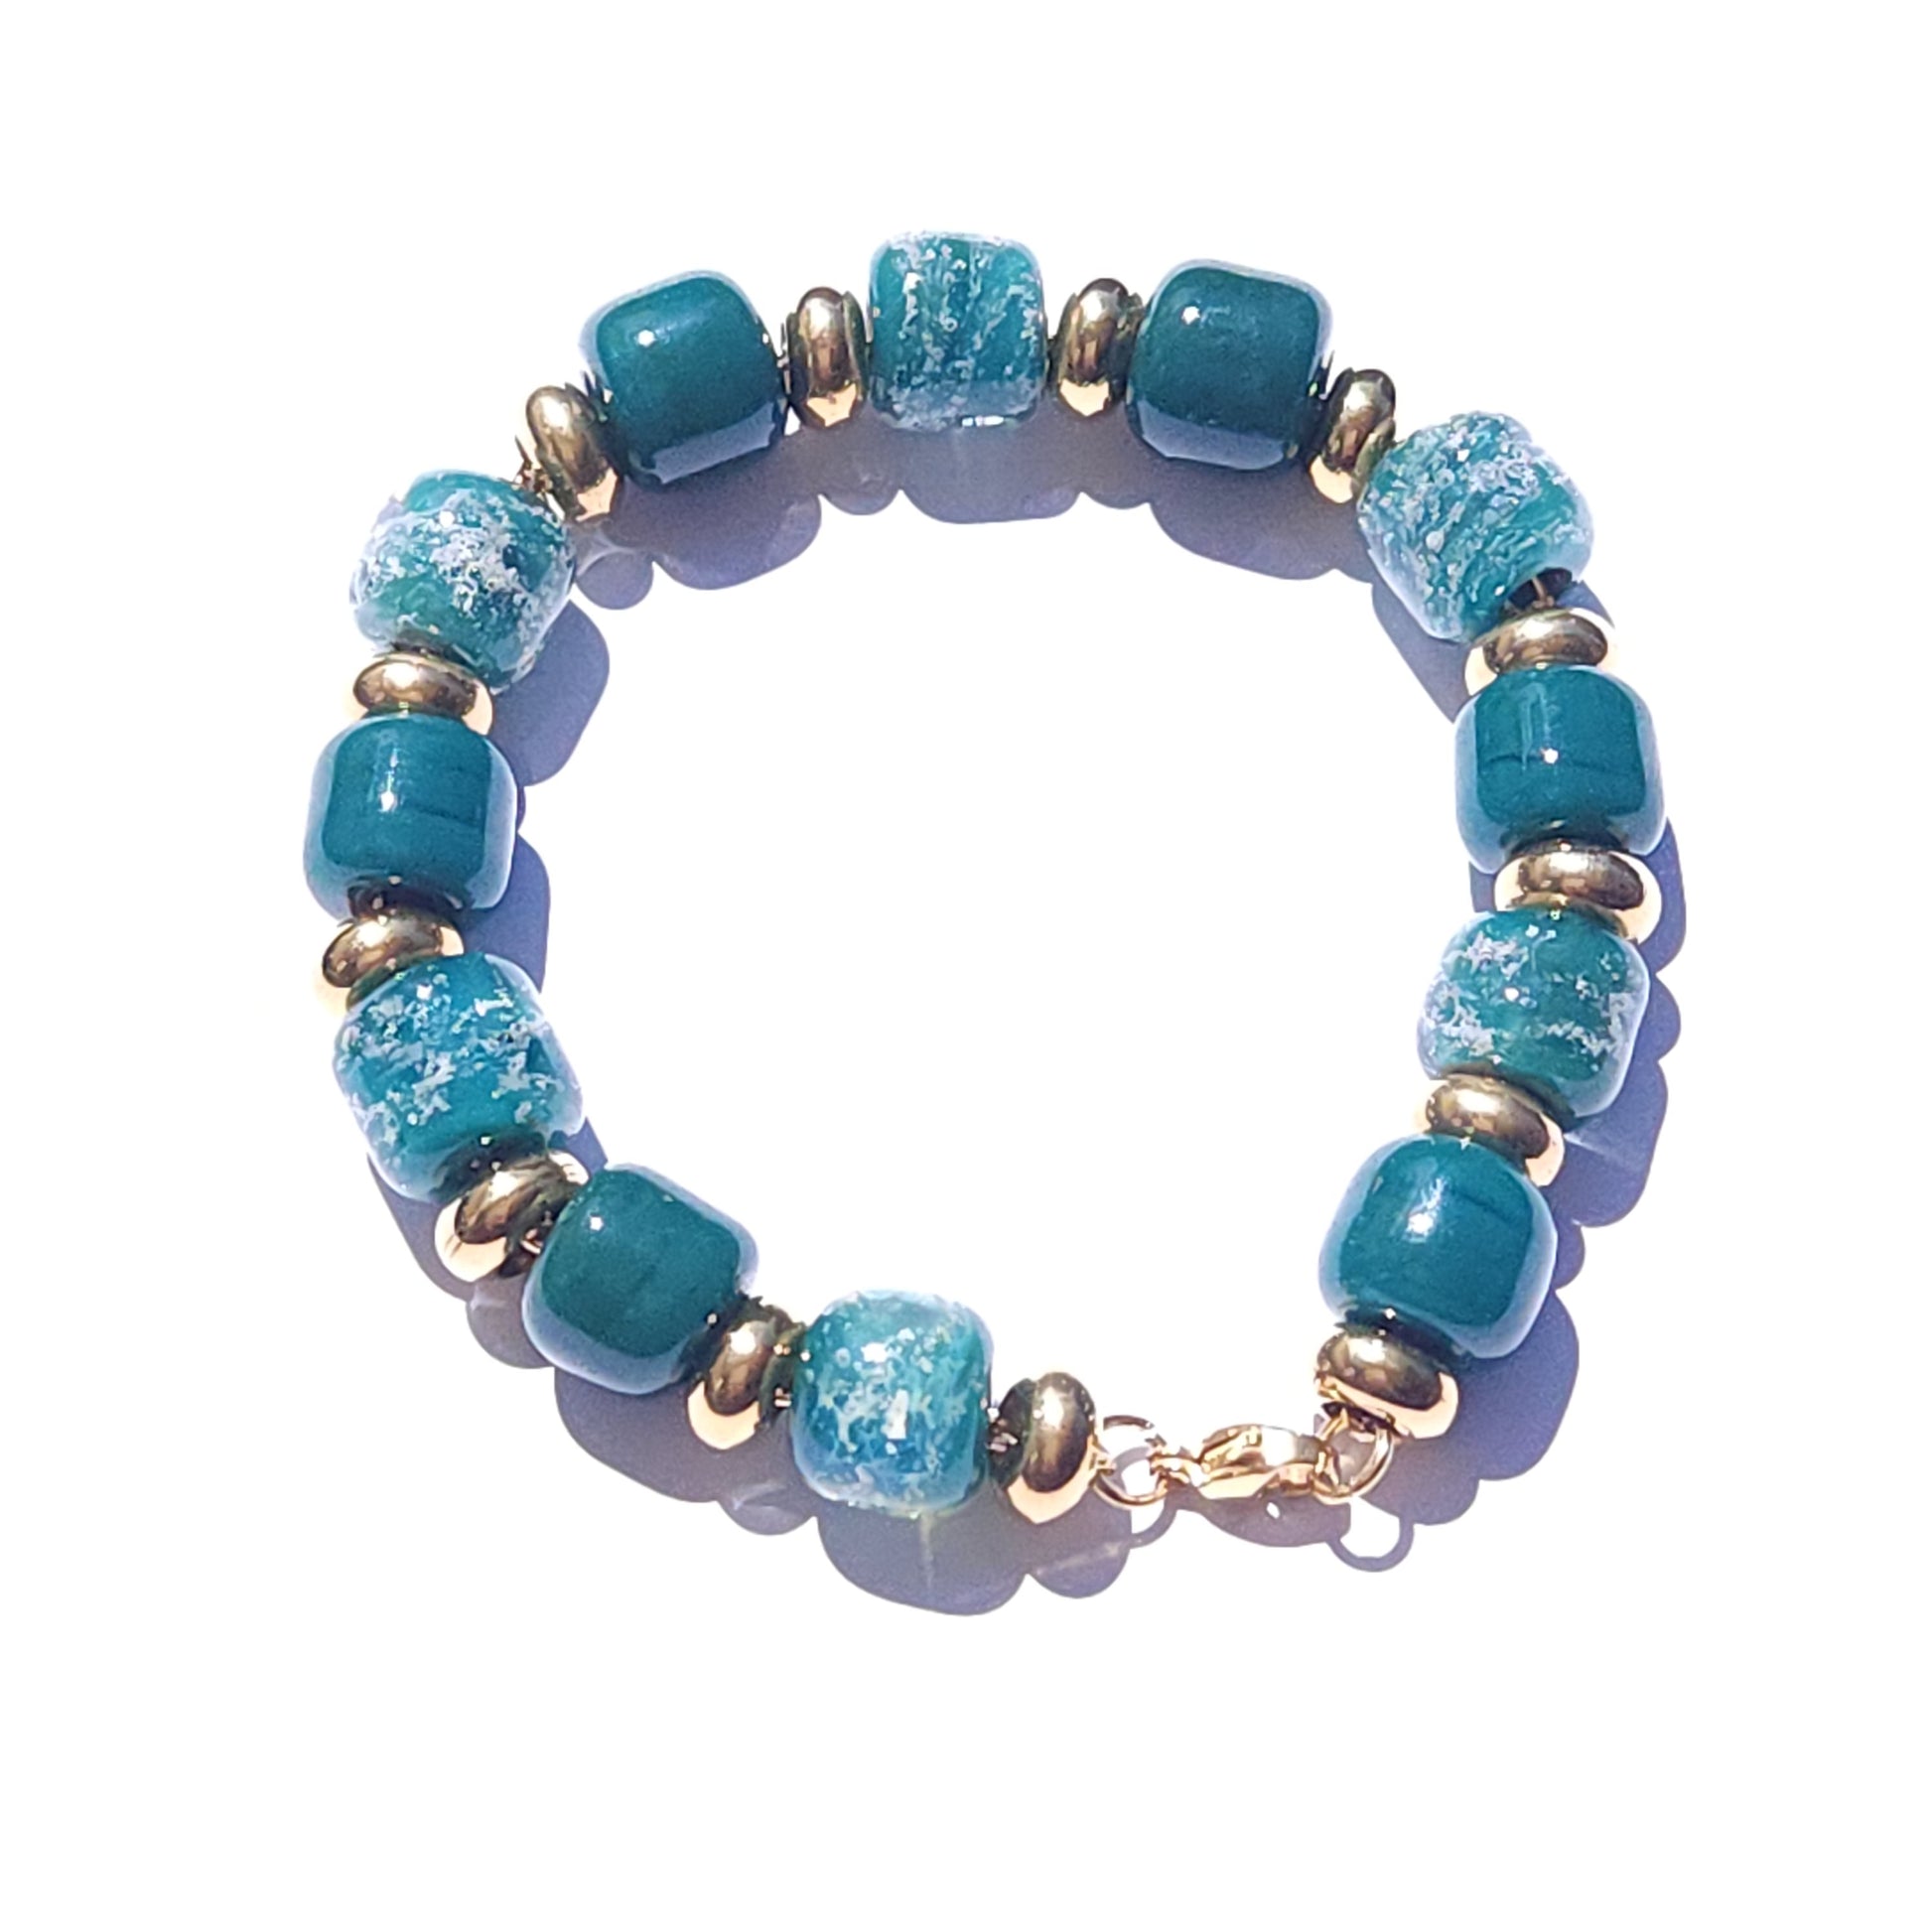 Eternal Bracelet with Cremation Ashes - Gold-Cremation Beads-DragonFire Glass-Turquoise-DragonFire Glass Cremation Jewelry